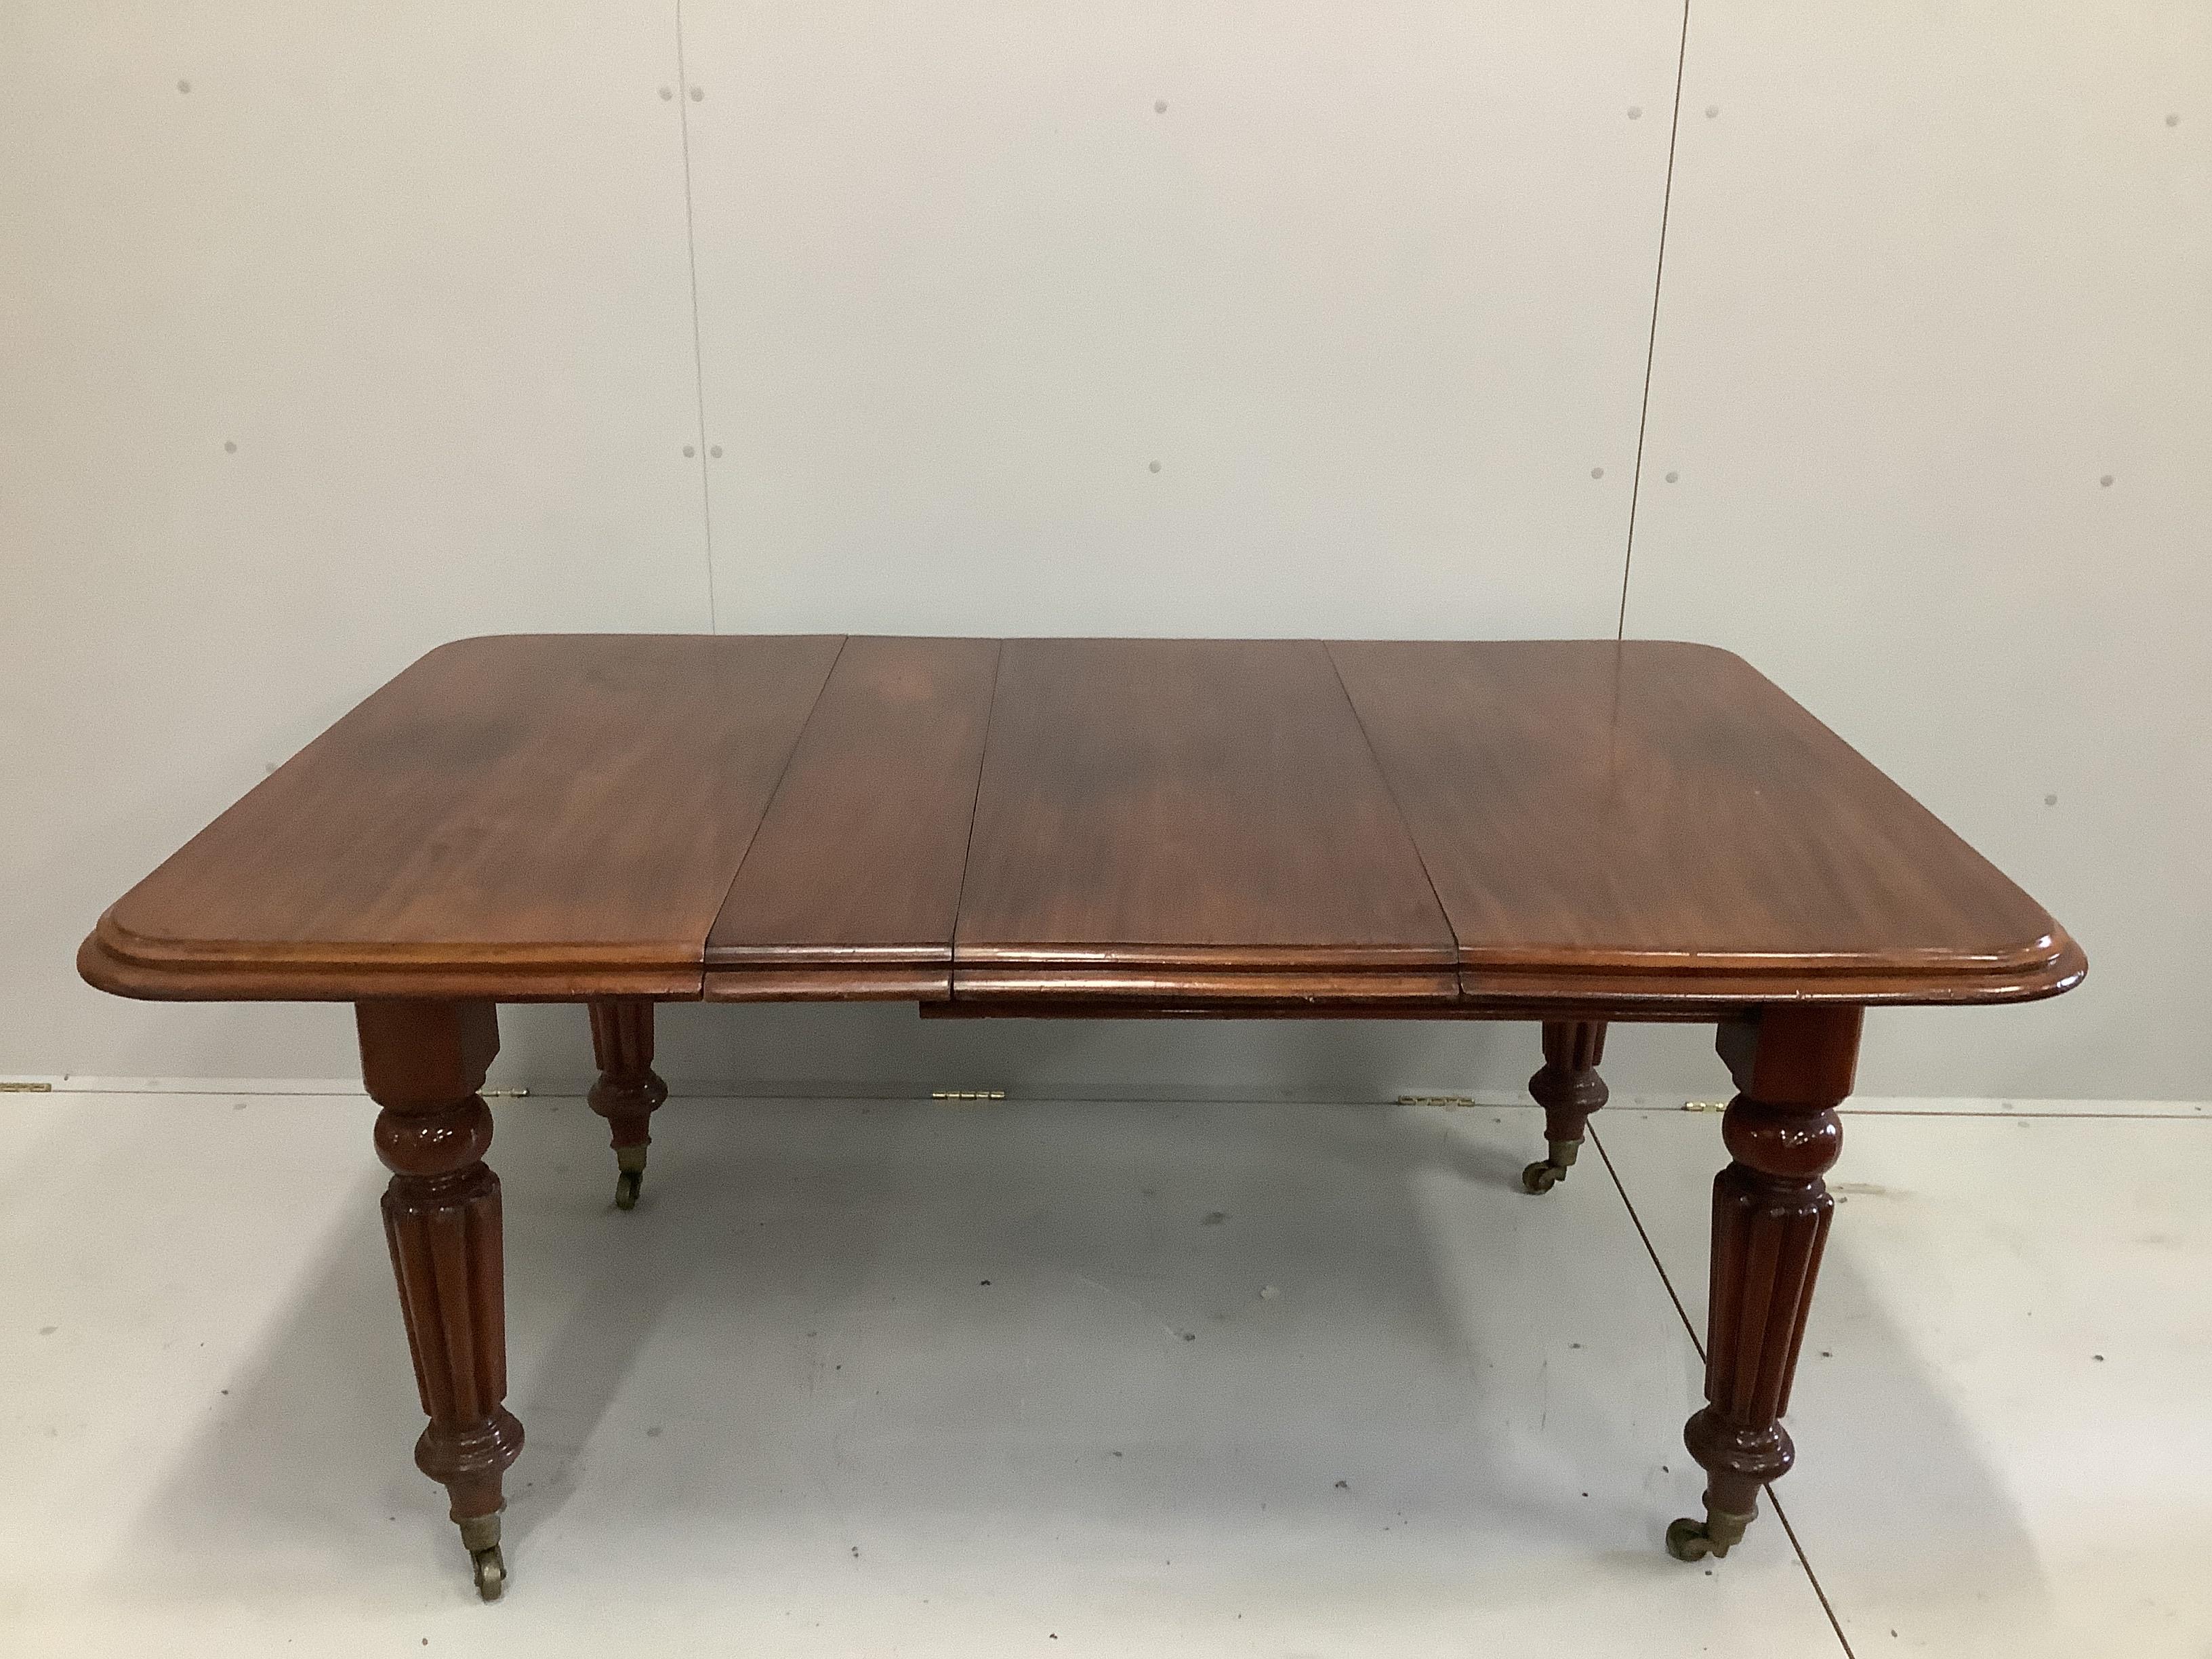 A Victorian mahogany extending dining table with two leaves, 164cm extended, depth 105cm, height 72cm